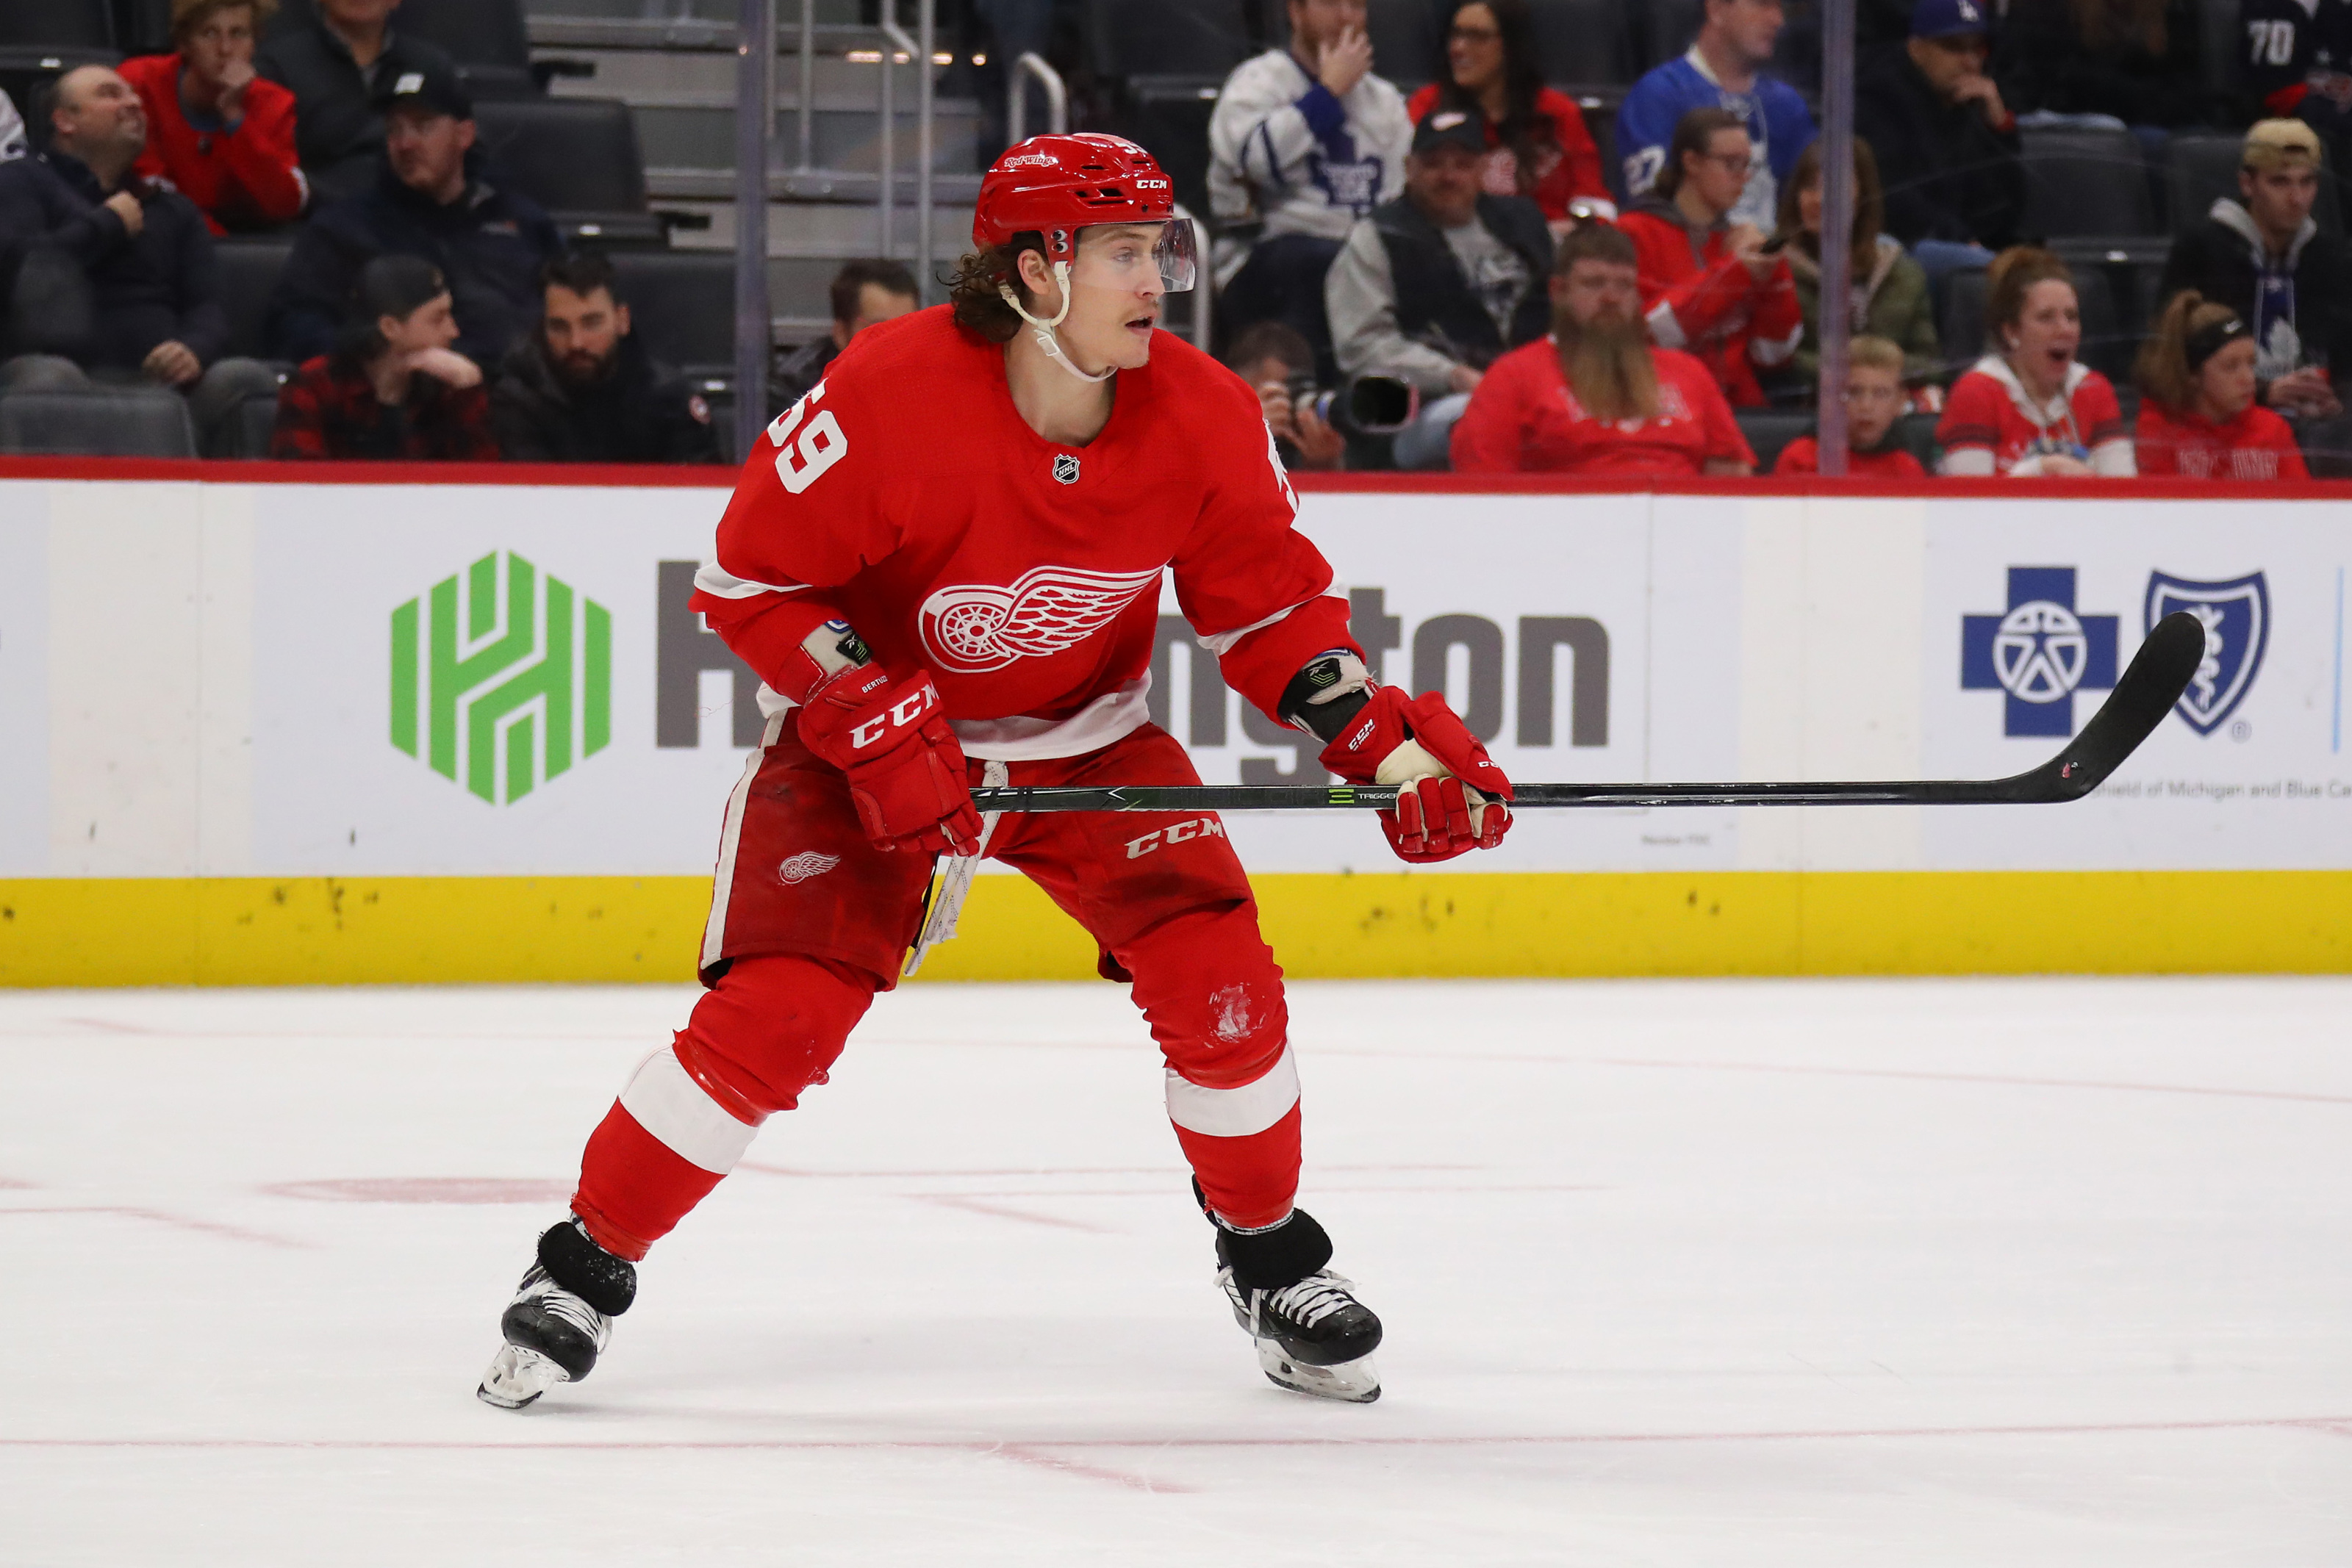 Tyler Bertuzzi may already be dealing with injury troubles